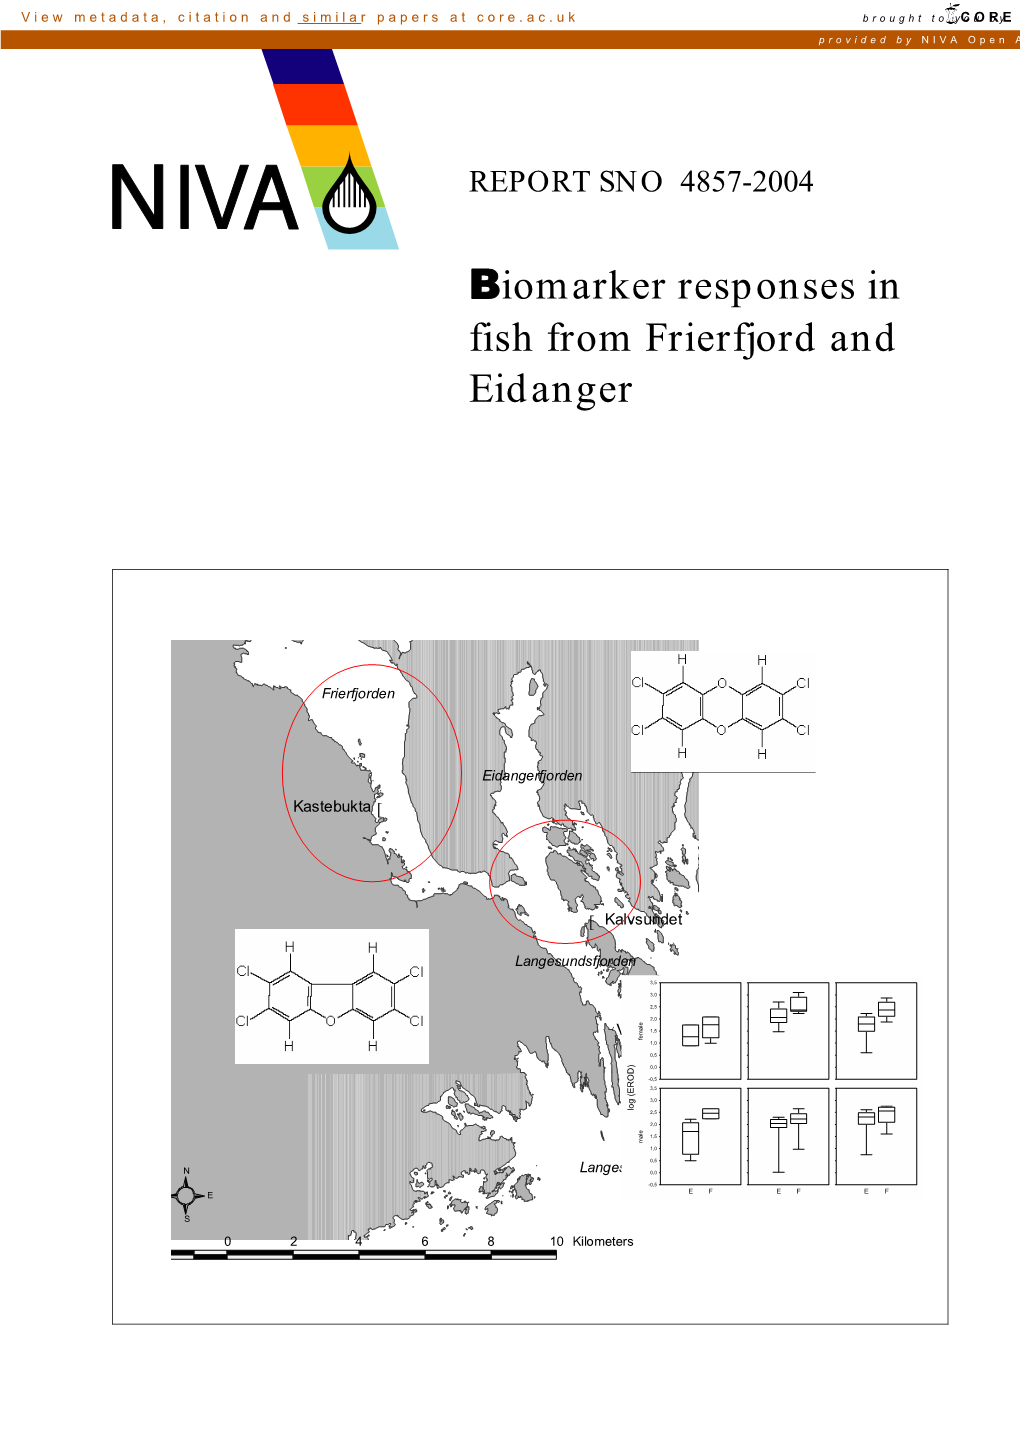 Biomarker Responses in Fish from Frierfjord and Eidanger